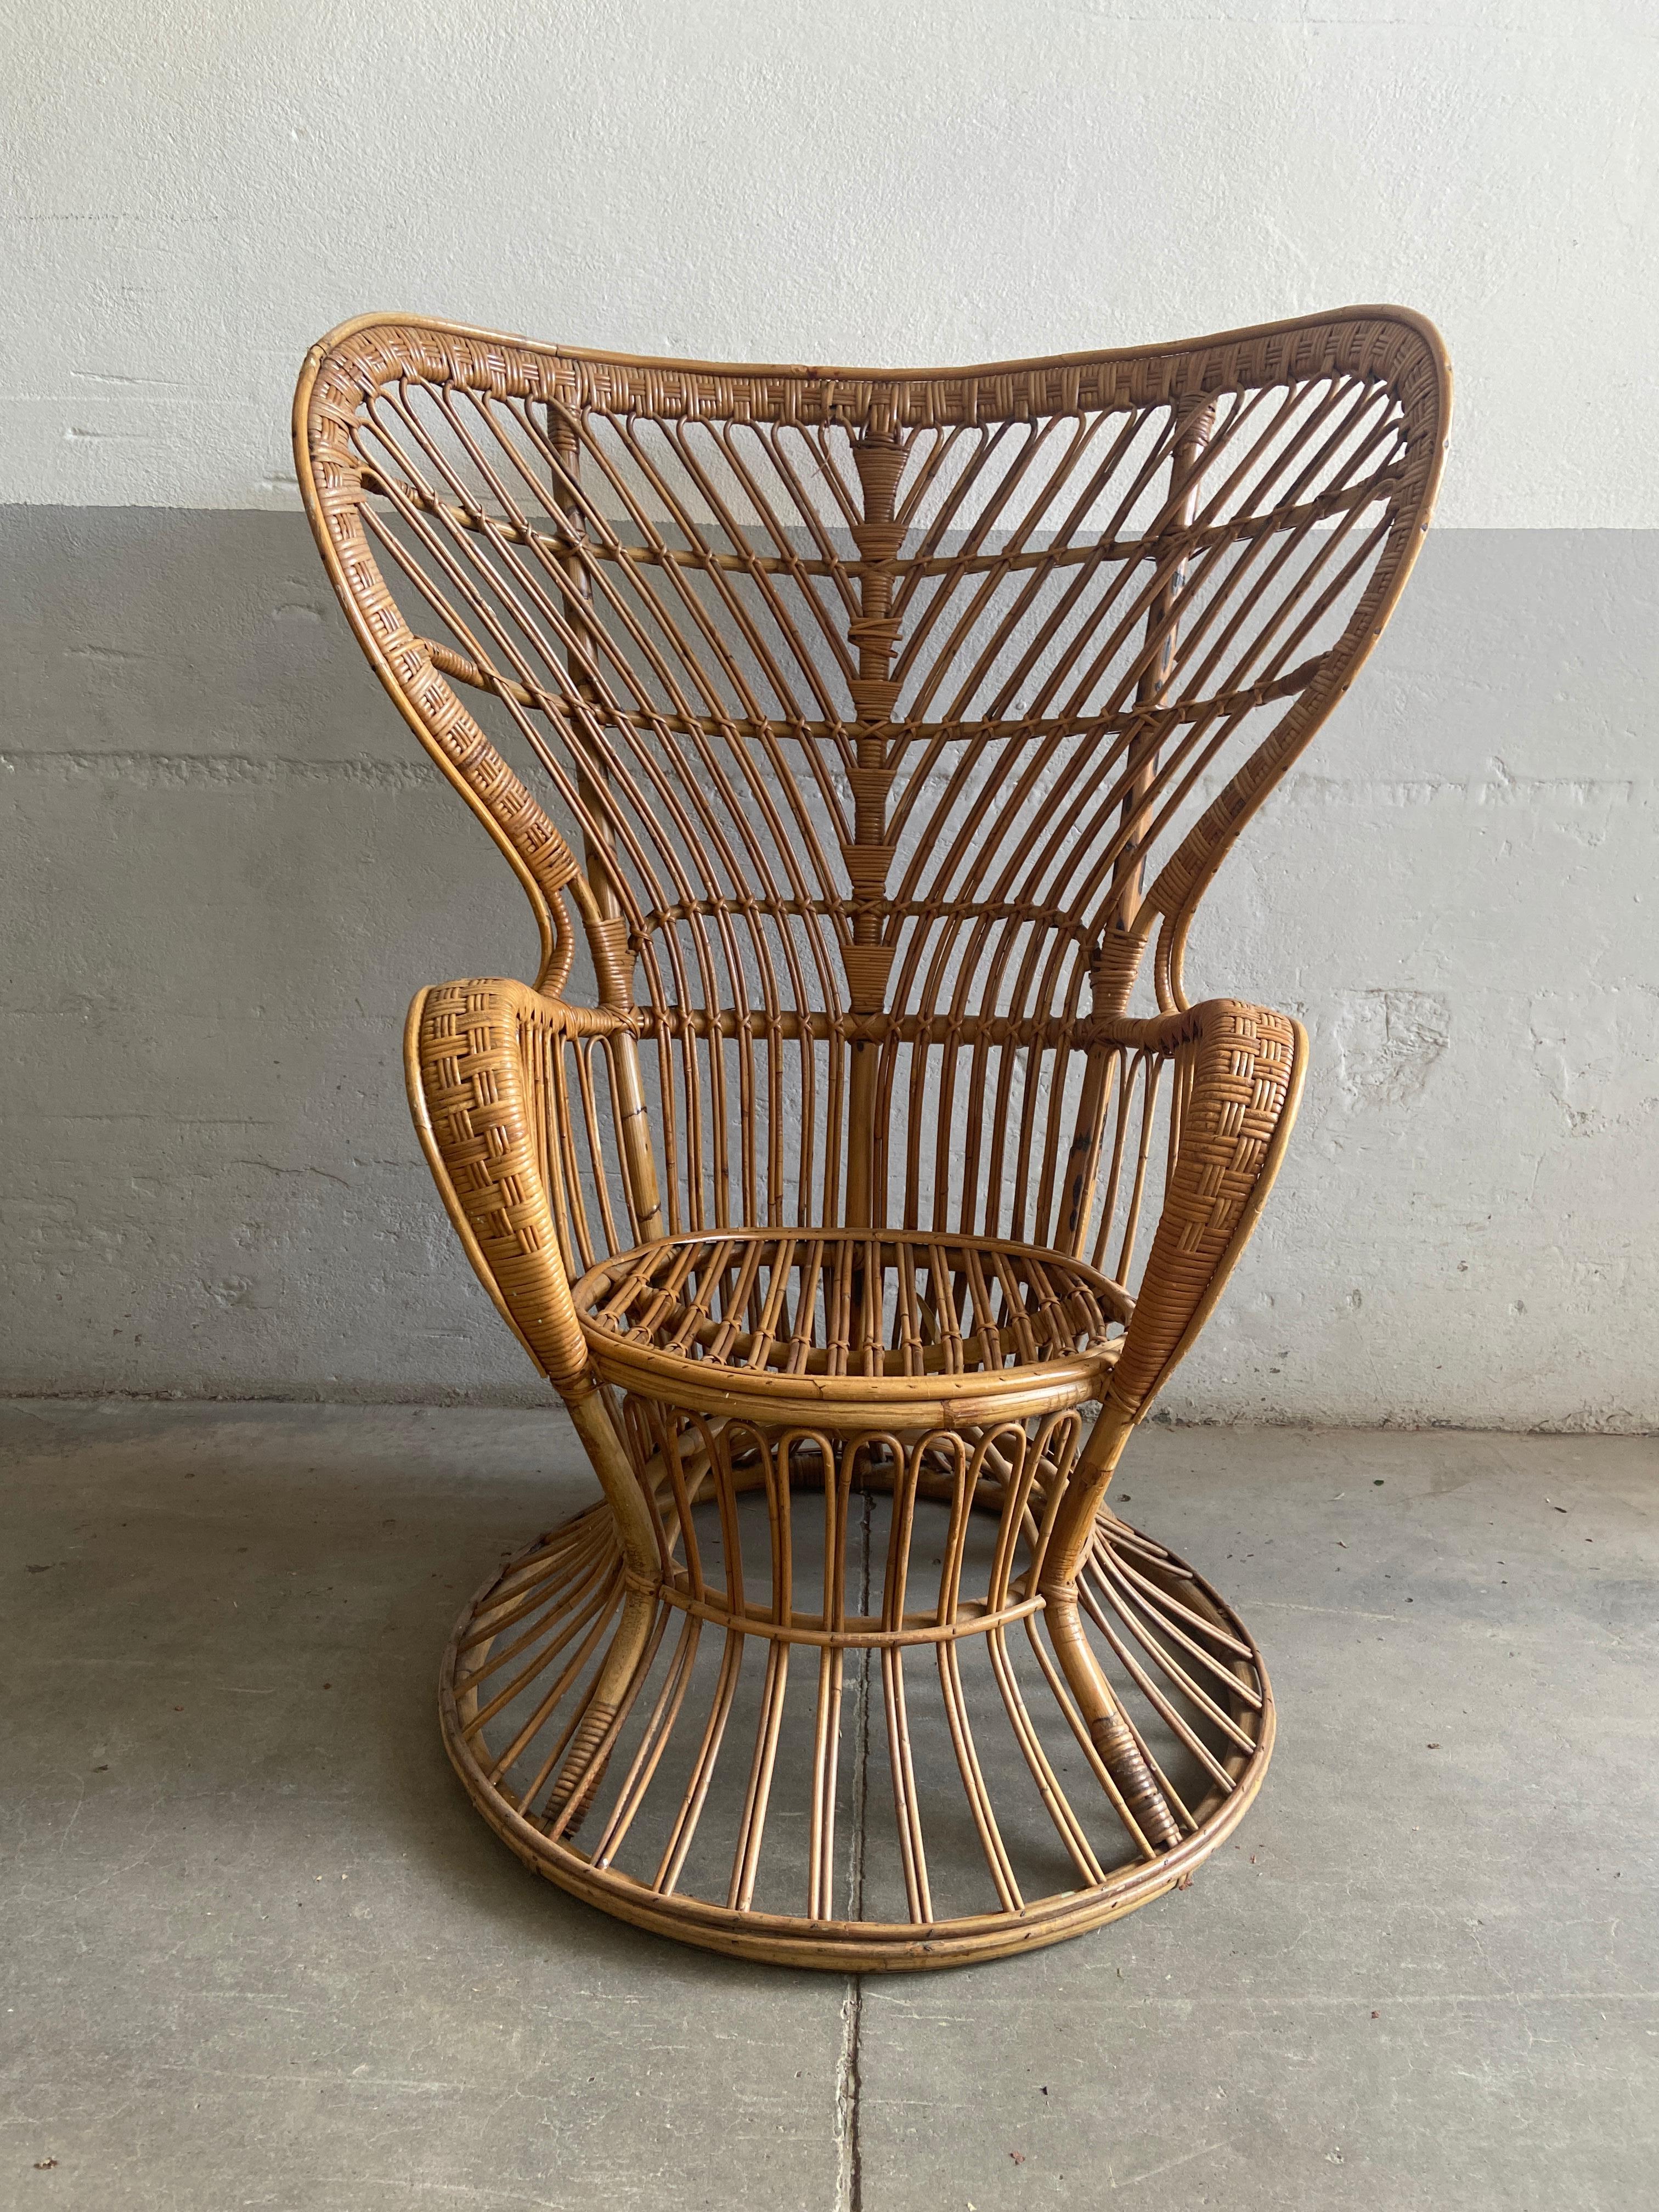 Wicker wingback chair designed by Lio Carminati, 1950. 
Lio Carminati and Gio Ponti originally designed this chair for the luxury ocean liner Conte Biancamano. 
This model of a wingback chair was used by Carlo Mollino for his erotic polaroid